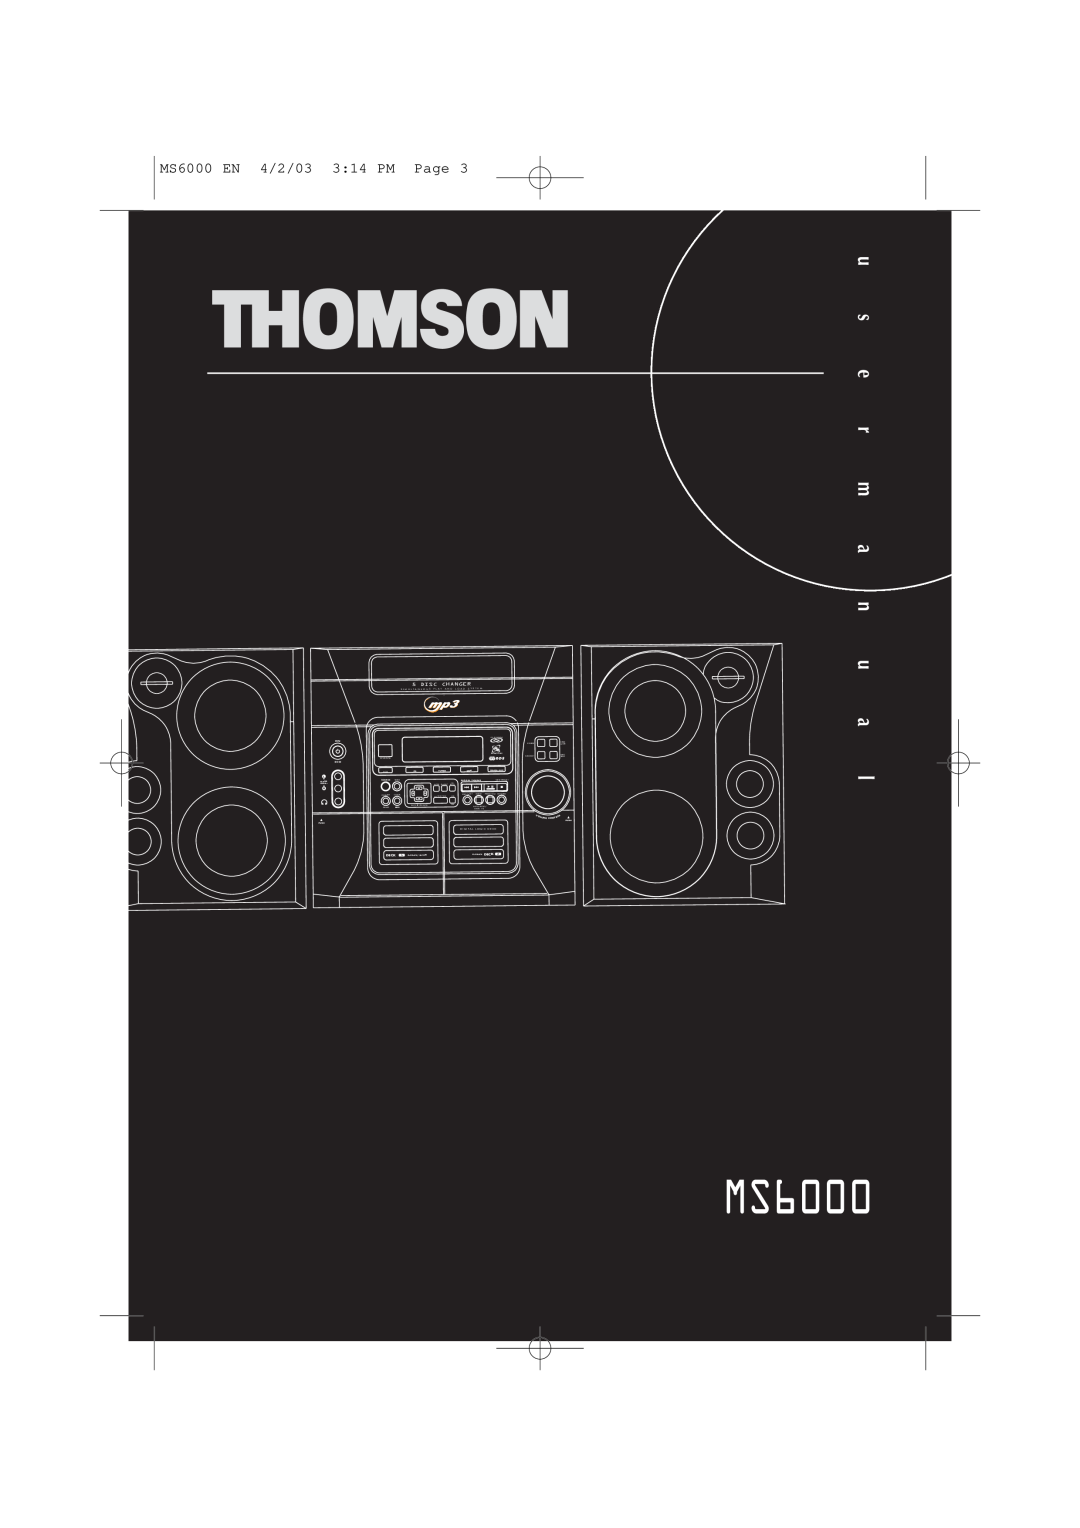 Technicolor - Thomson manual u s e r m a n u a l, MS6000 EN 4/2/03 3 14 PM Page, On Eco, Olume Contro, Deck 